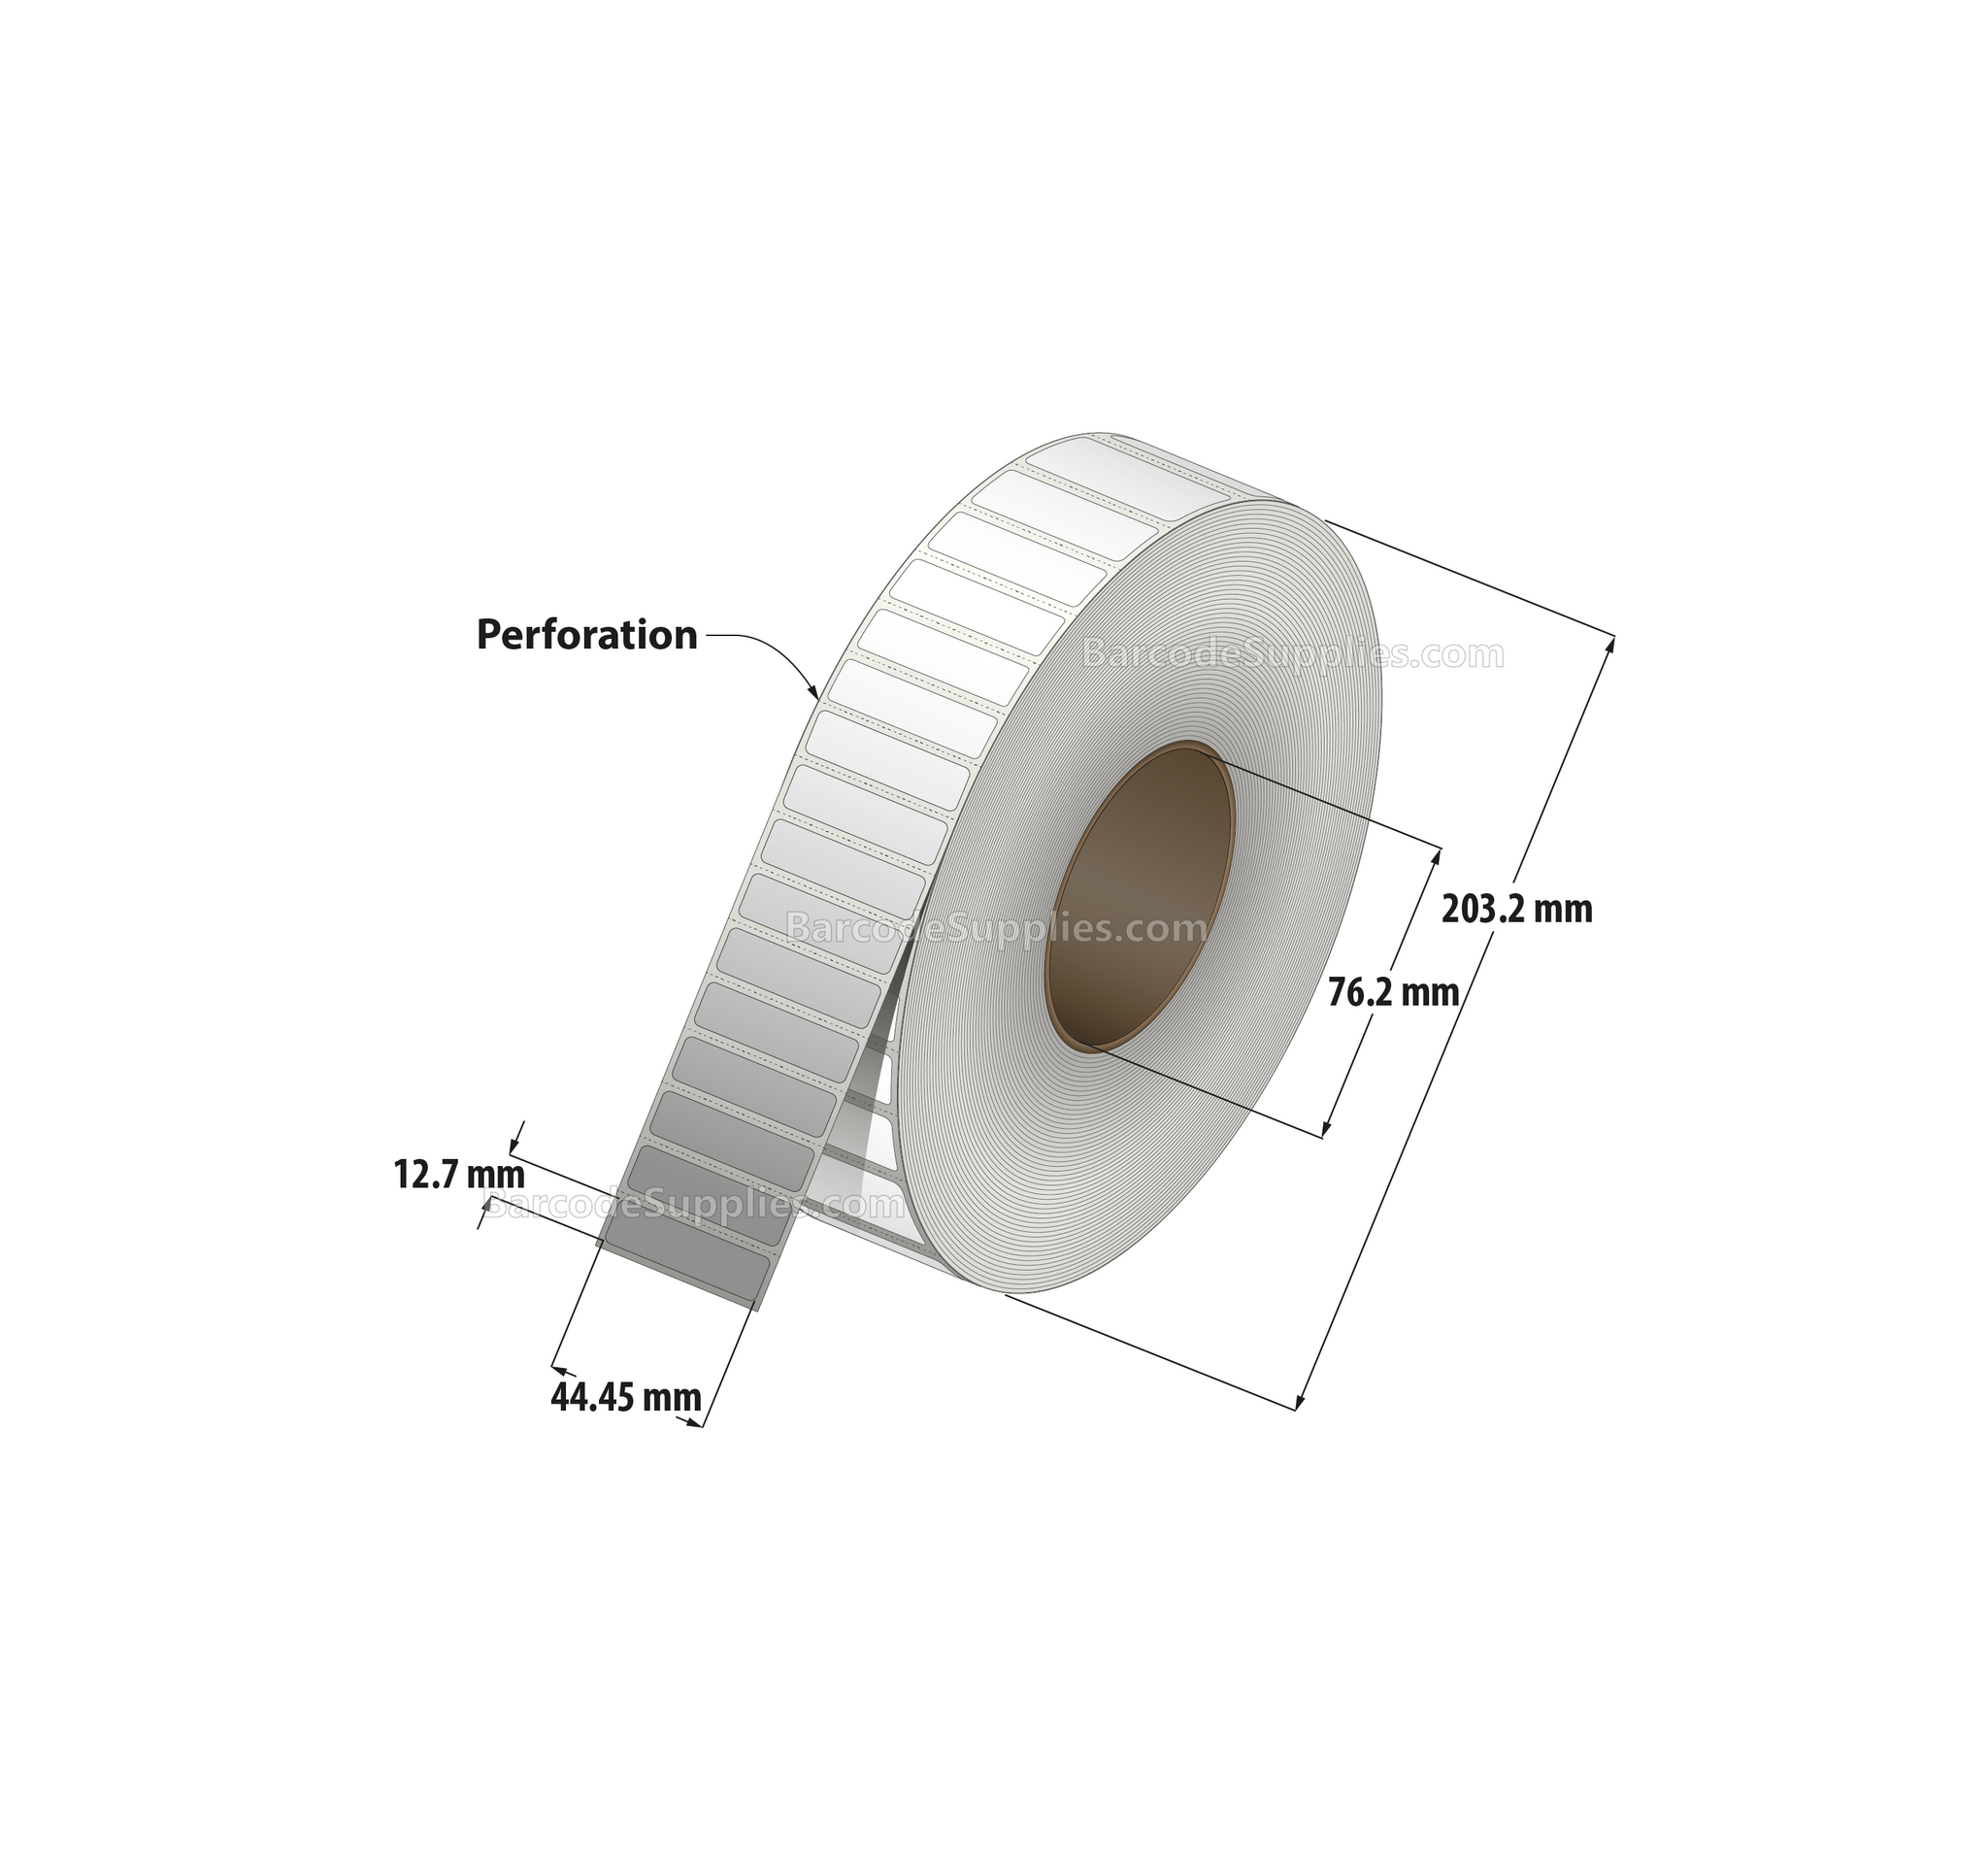 1.75 x 0.5 Thermal Transfer White Labels With Permanent Adhesive - Perforated - 10,000 Labels Per Roll - Carton Of 8 Rolls - 80000 Labels Total - MPN: RP-175-05-10000-3